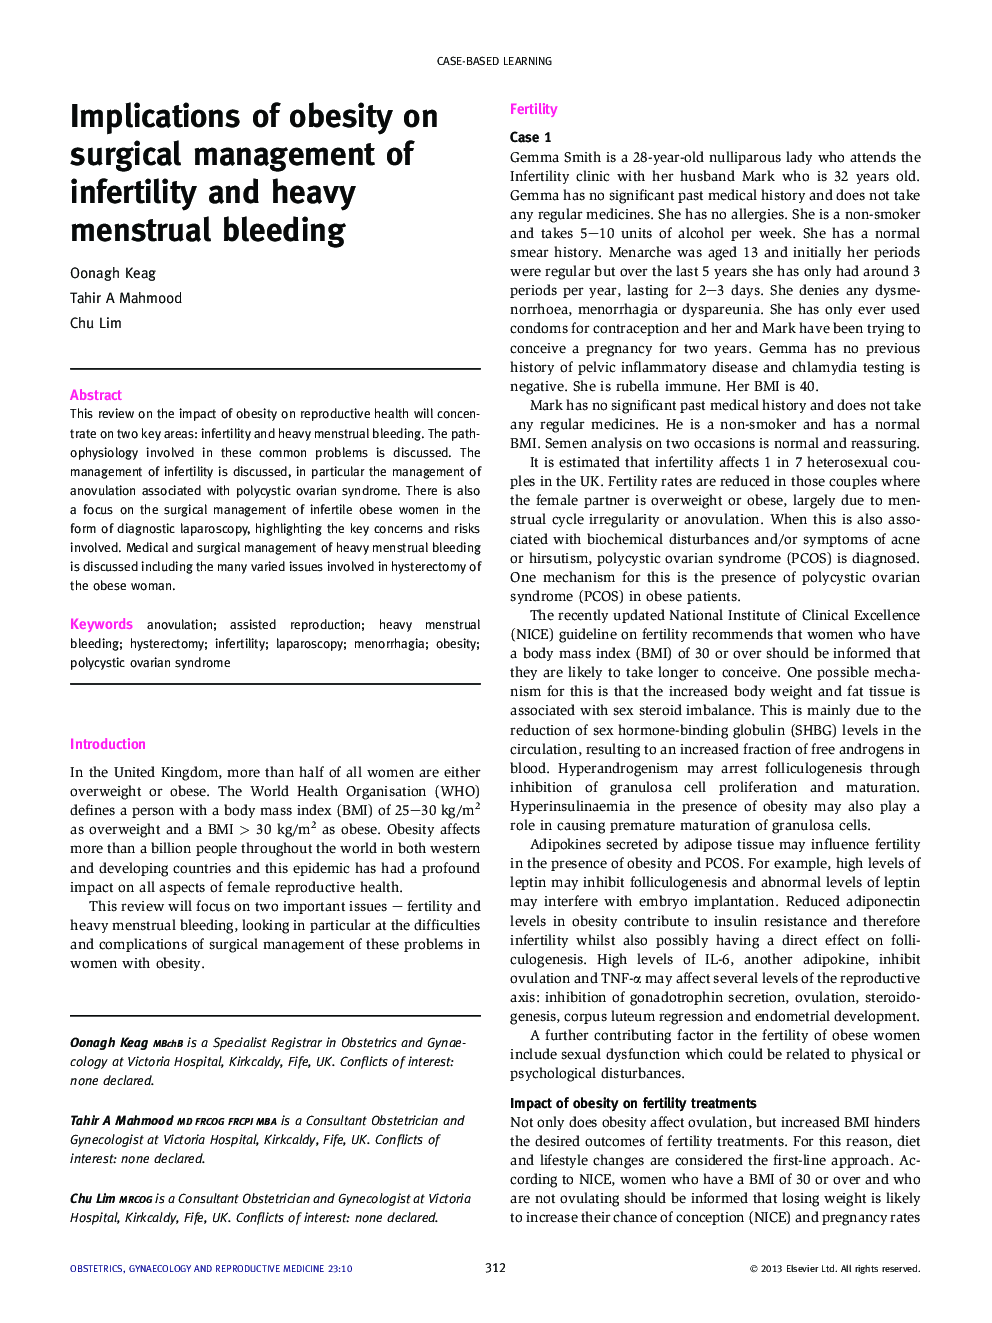 Implications of obesity on surgical management of infertility and heavy menstrual bleeding